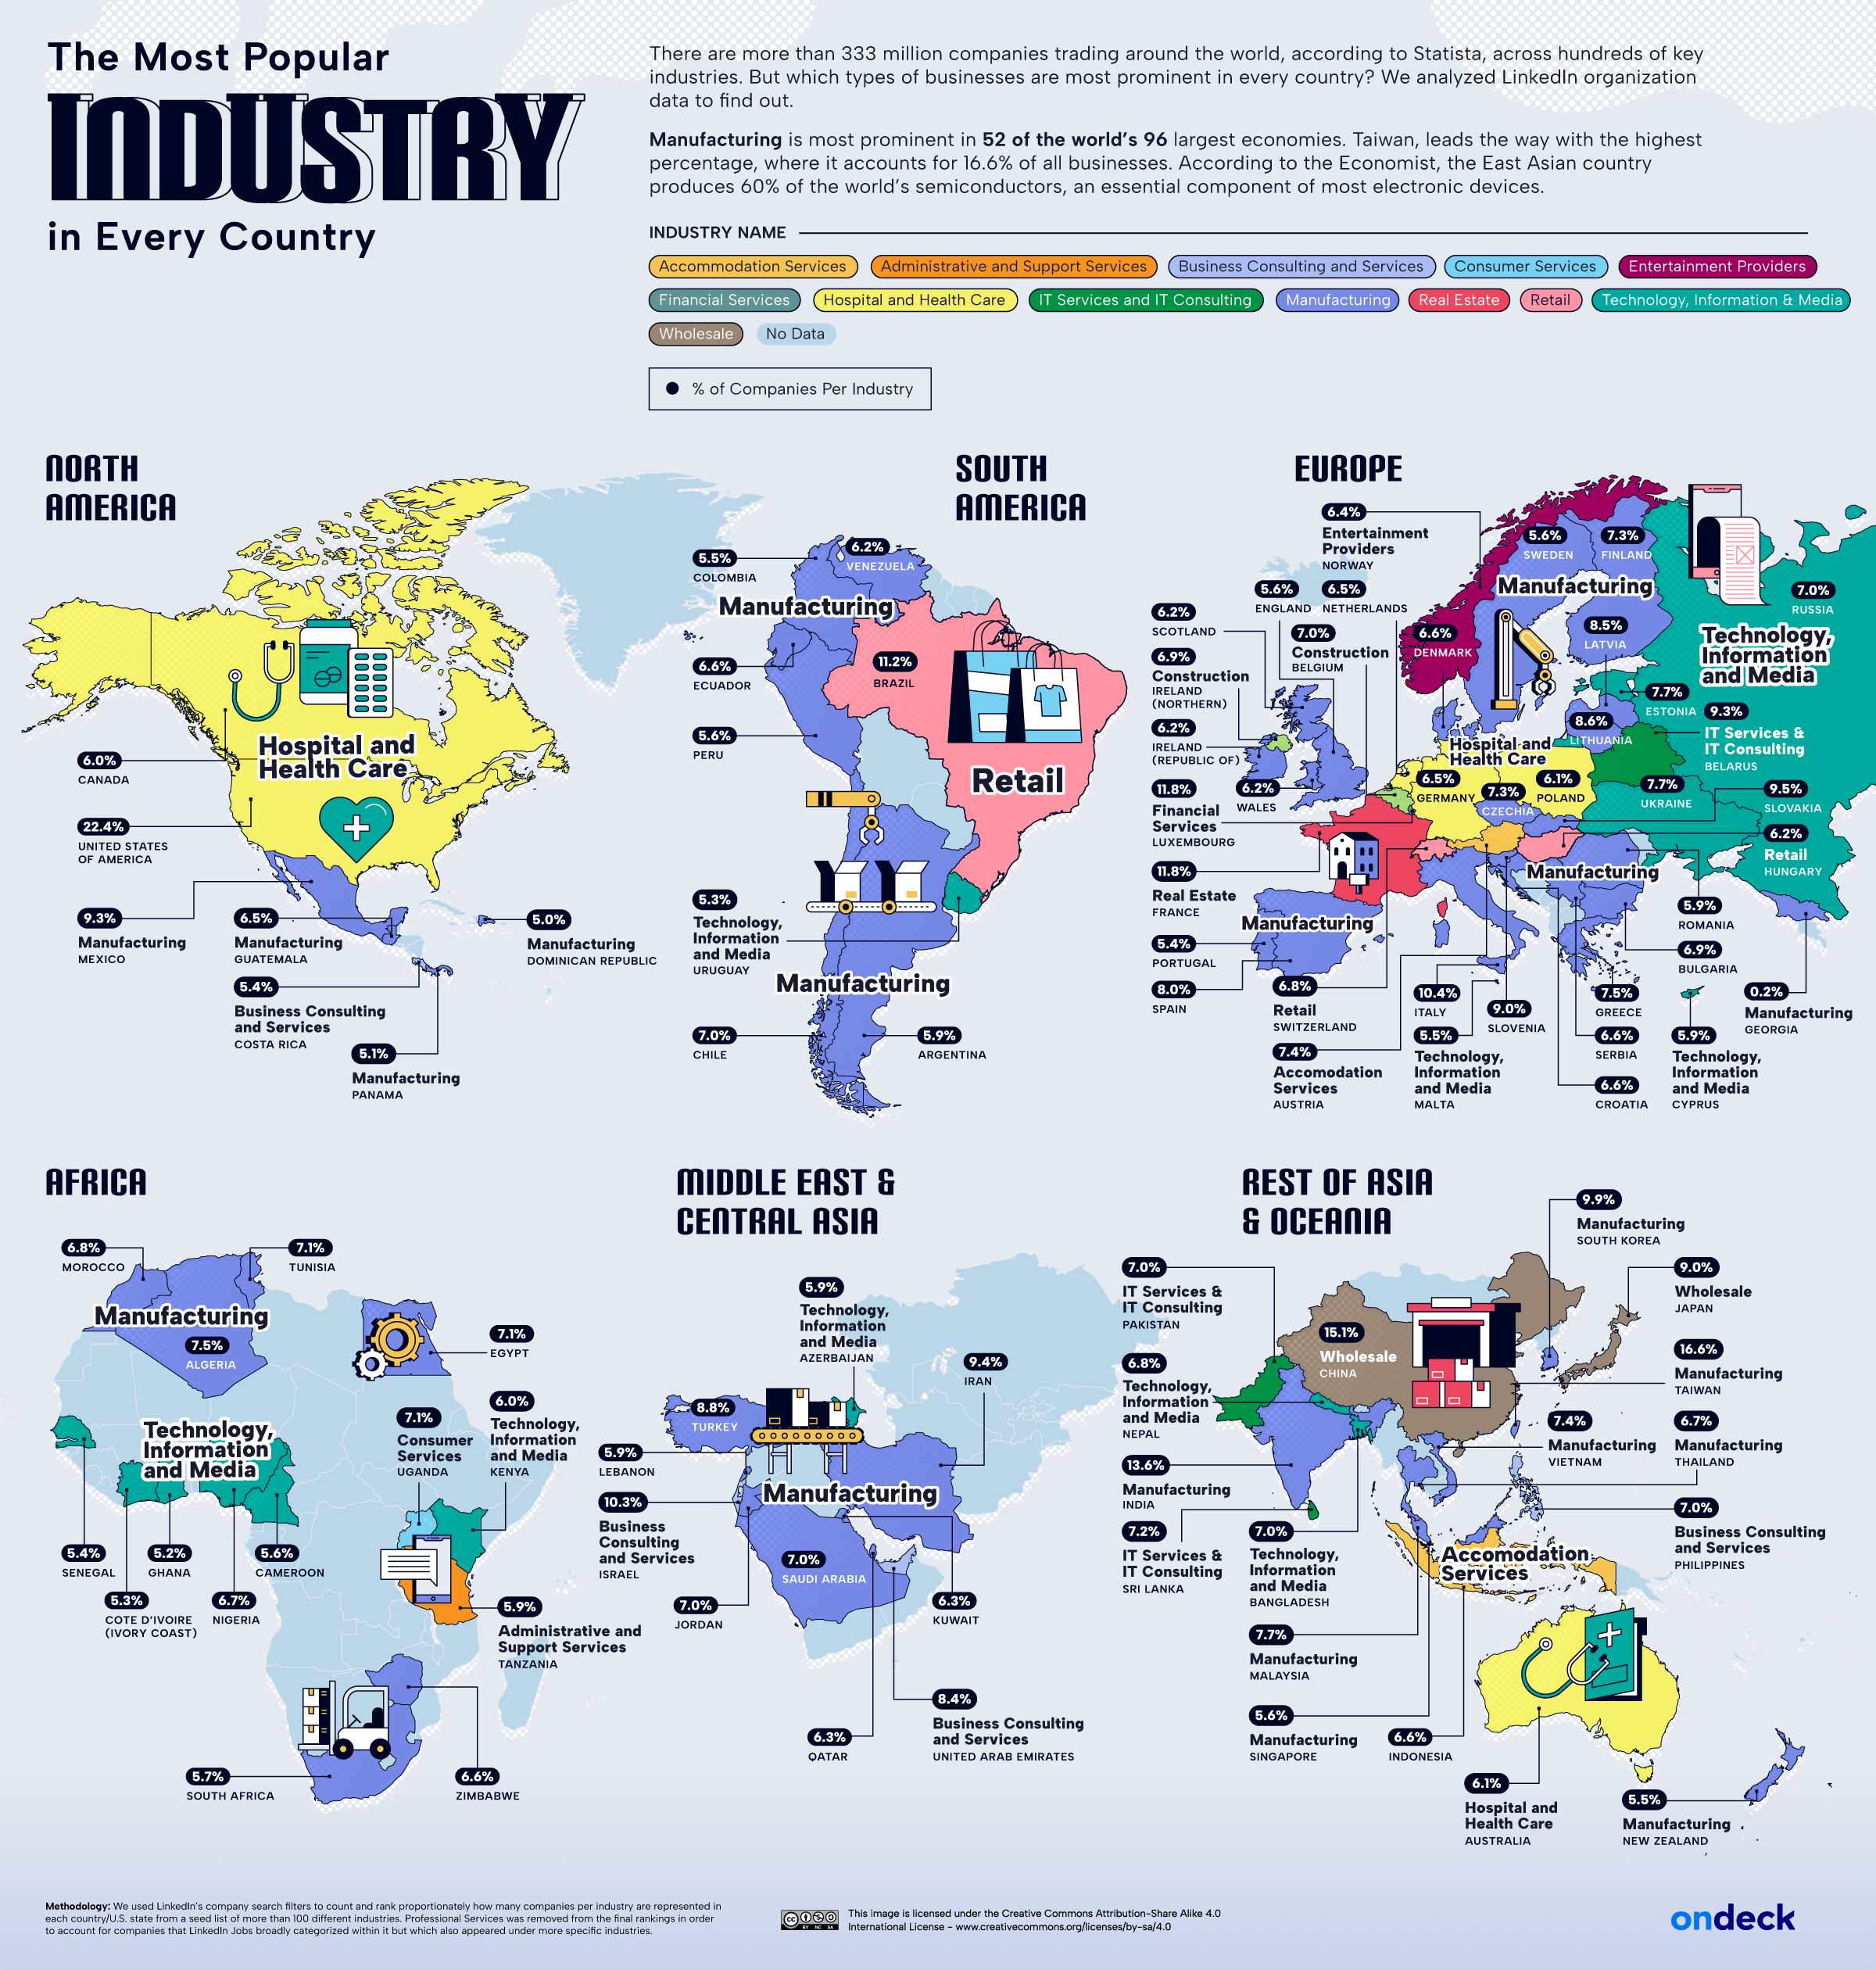 Map of the top business industries in every country